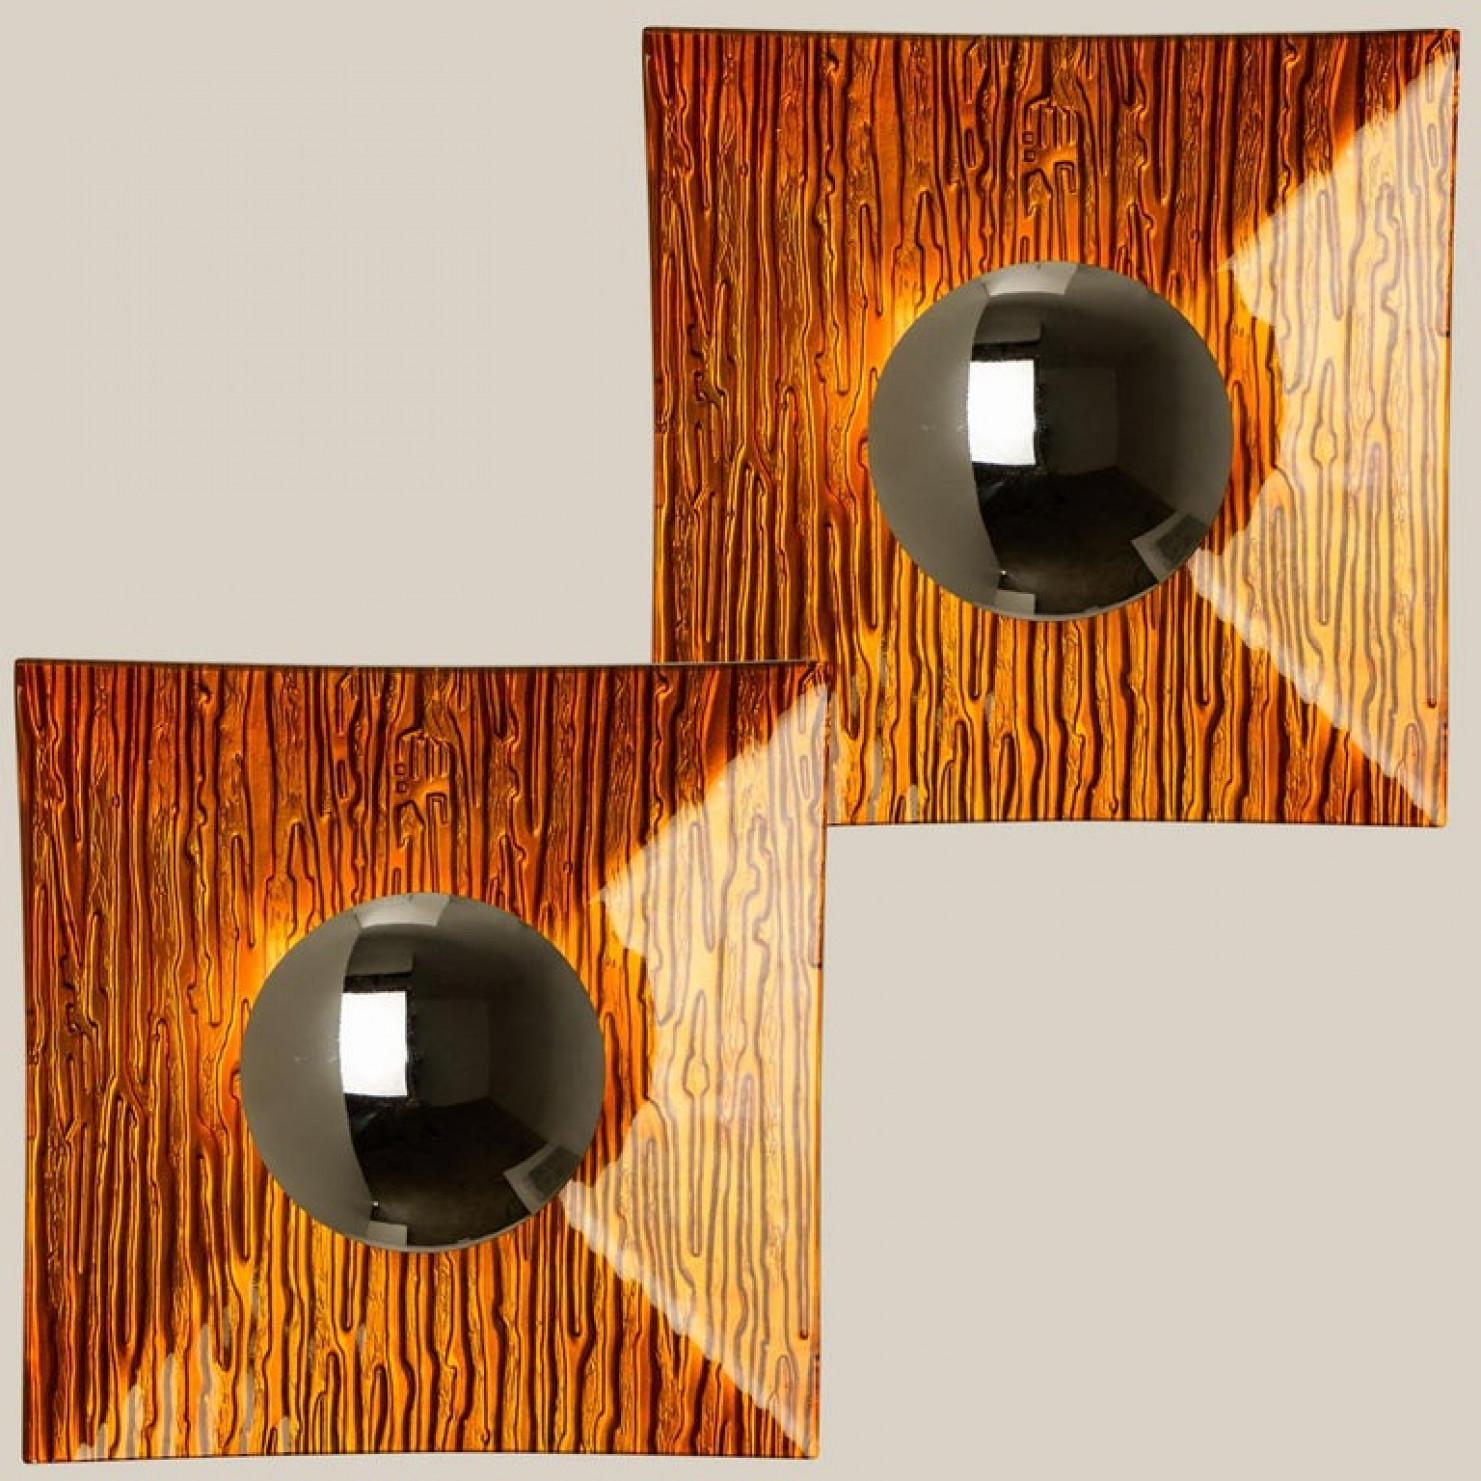 Pair of unusual shapedxa0orange metal wall lights with a with orange glass back plate Space Age wall lights from Italy, 1970s.
Unique 1970s design. This unique pair not only functions as light source but also as a sculptural component.

In excellent